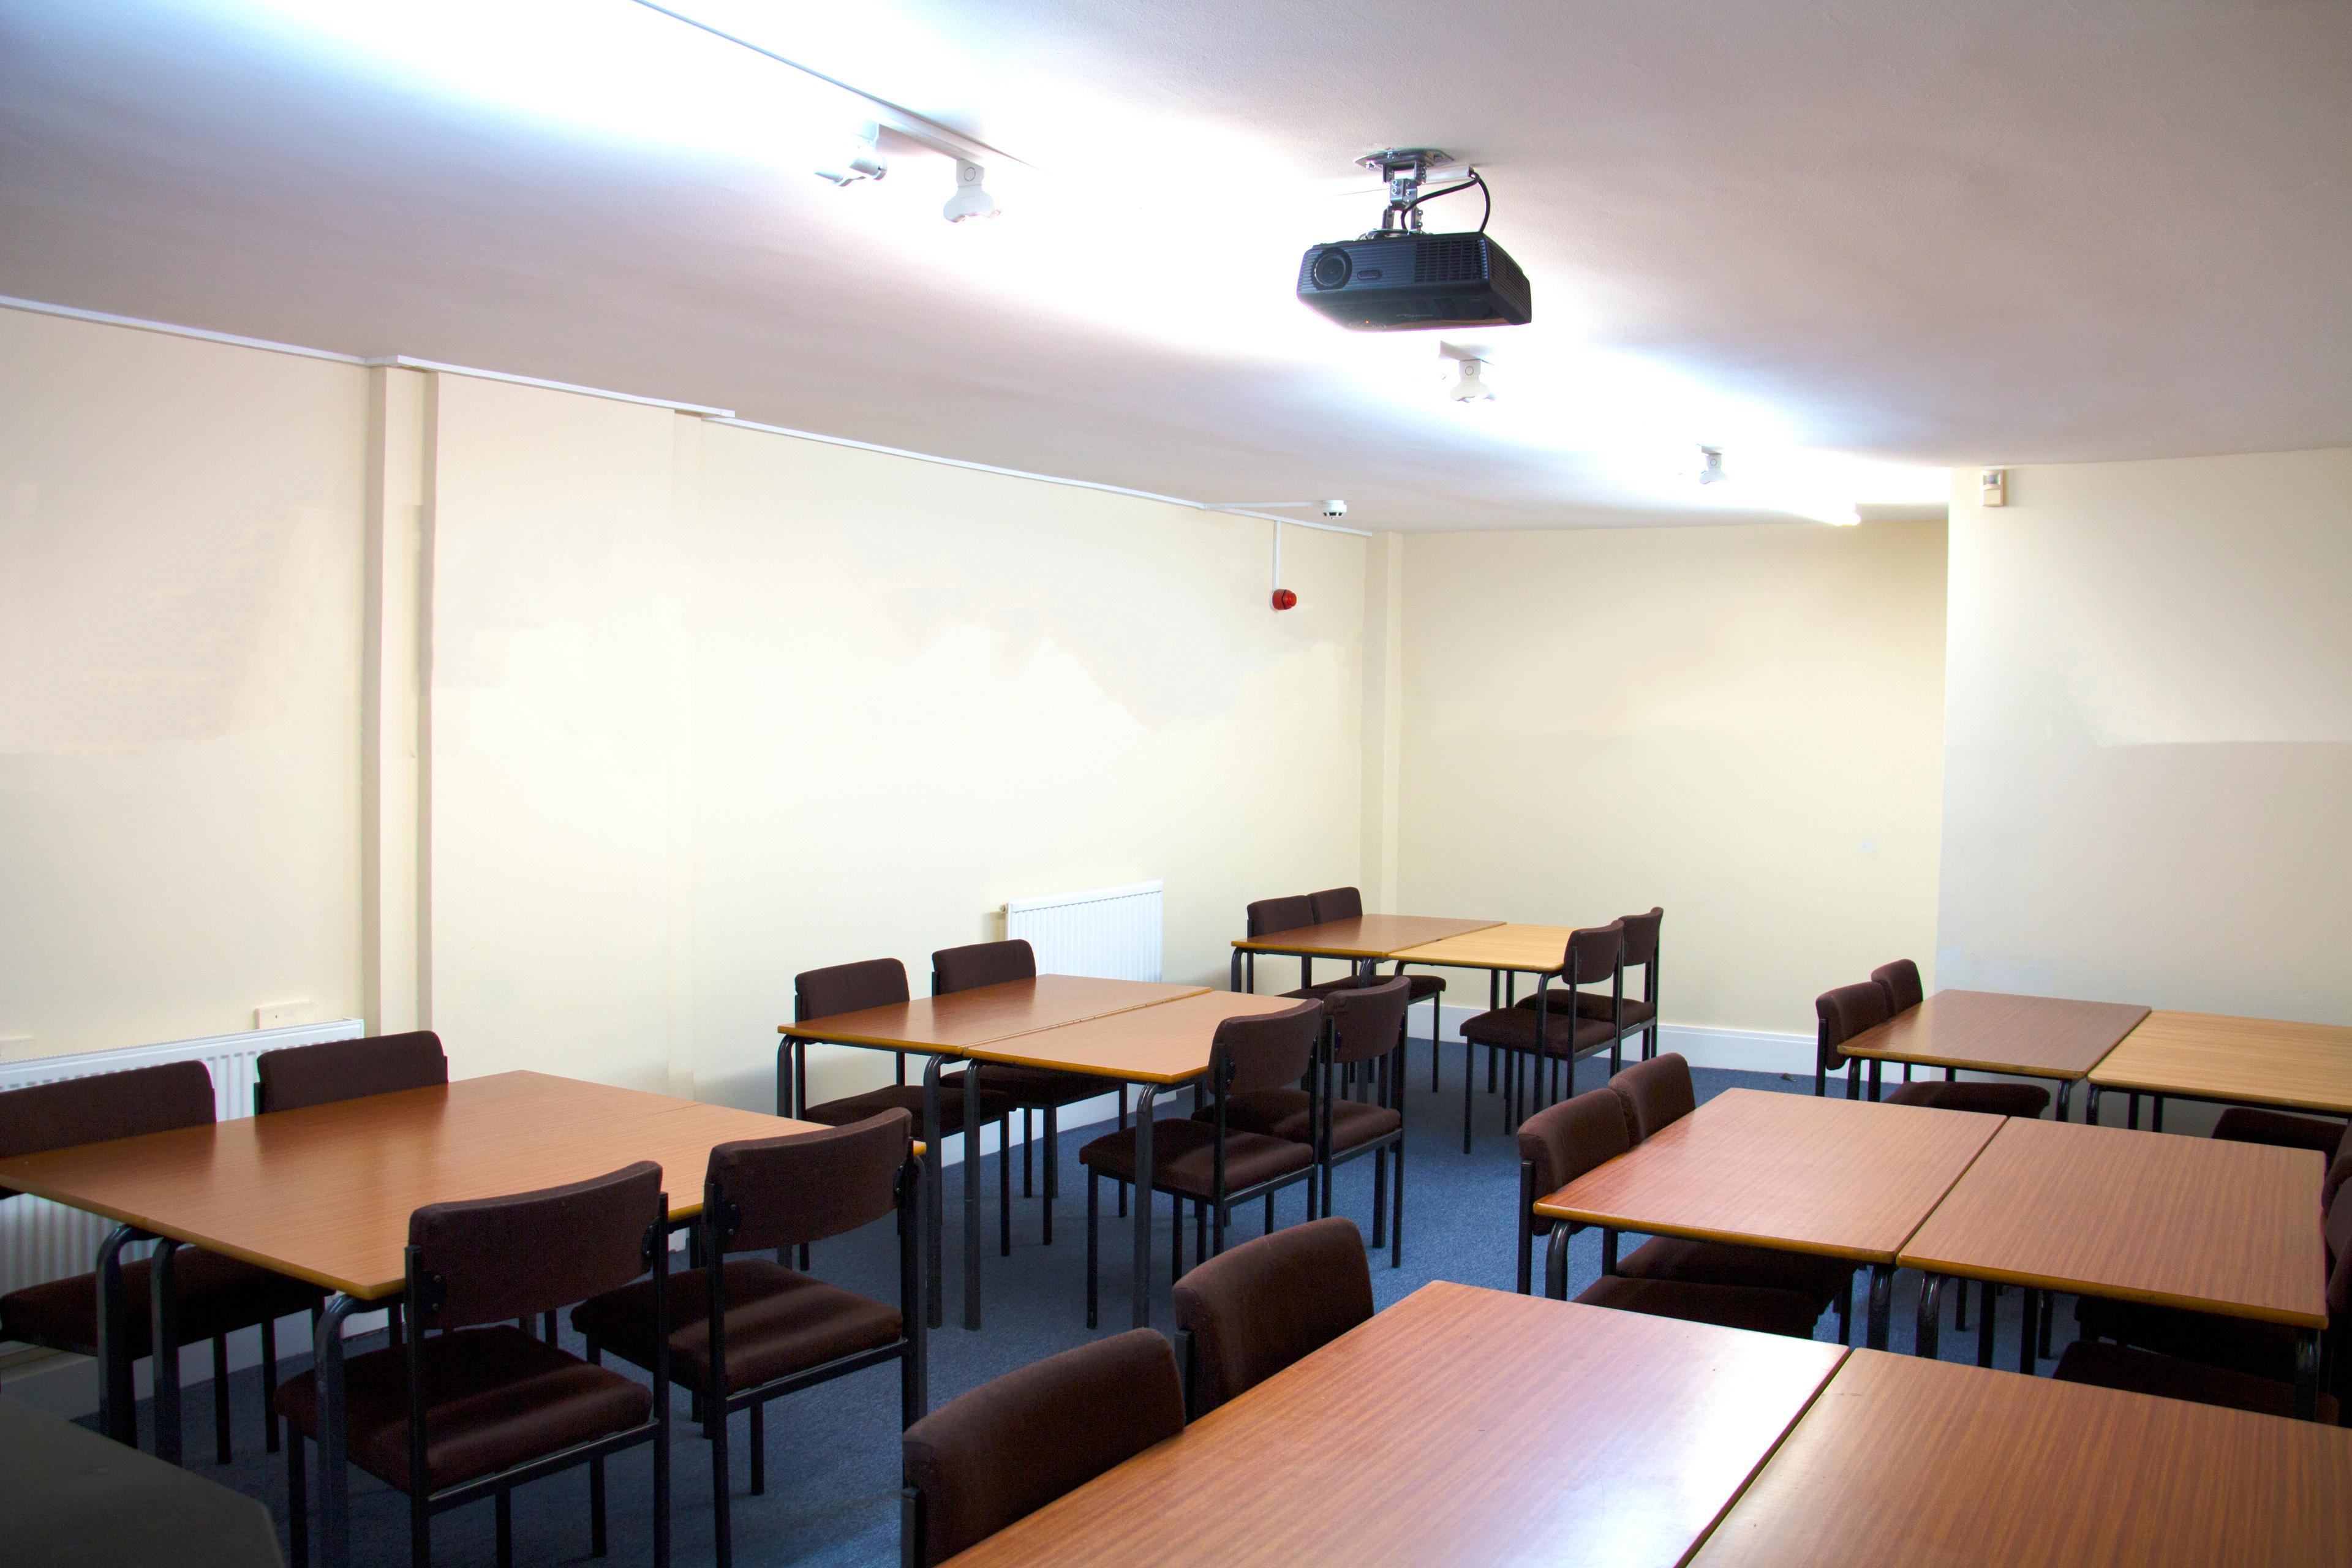 My Meeting Space - North London College, Meeting Room / Classroom 106 photo #1